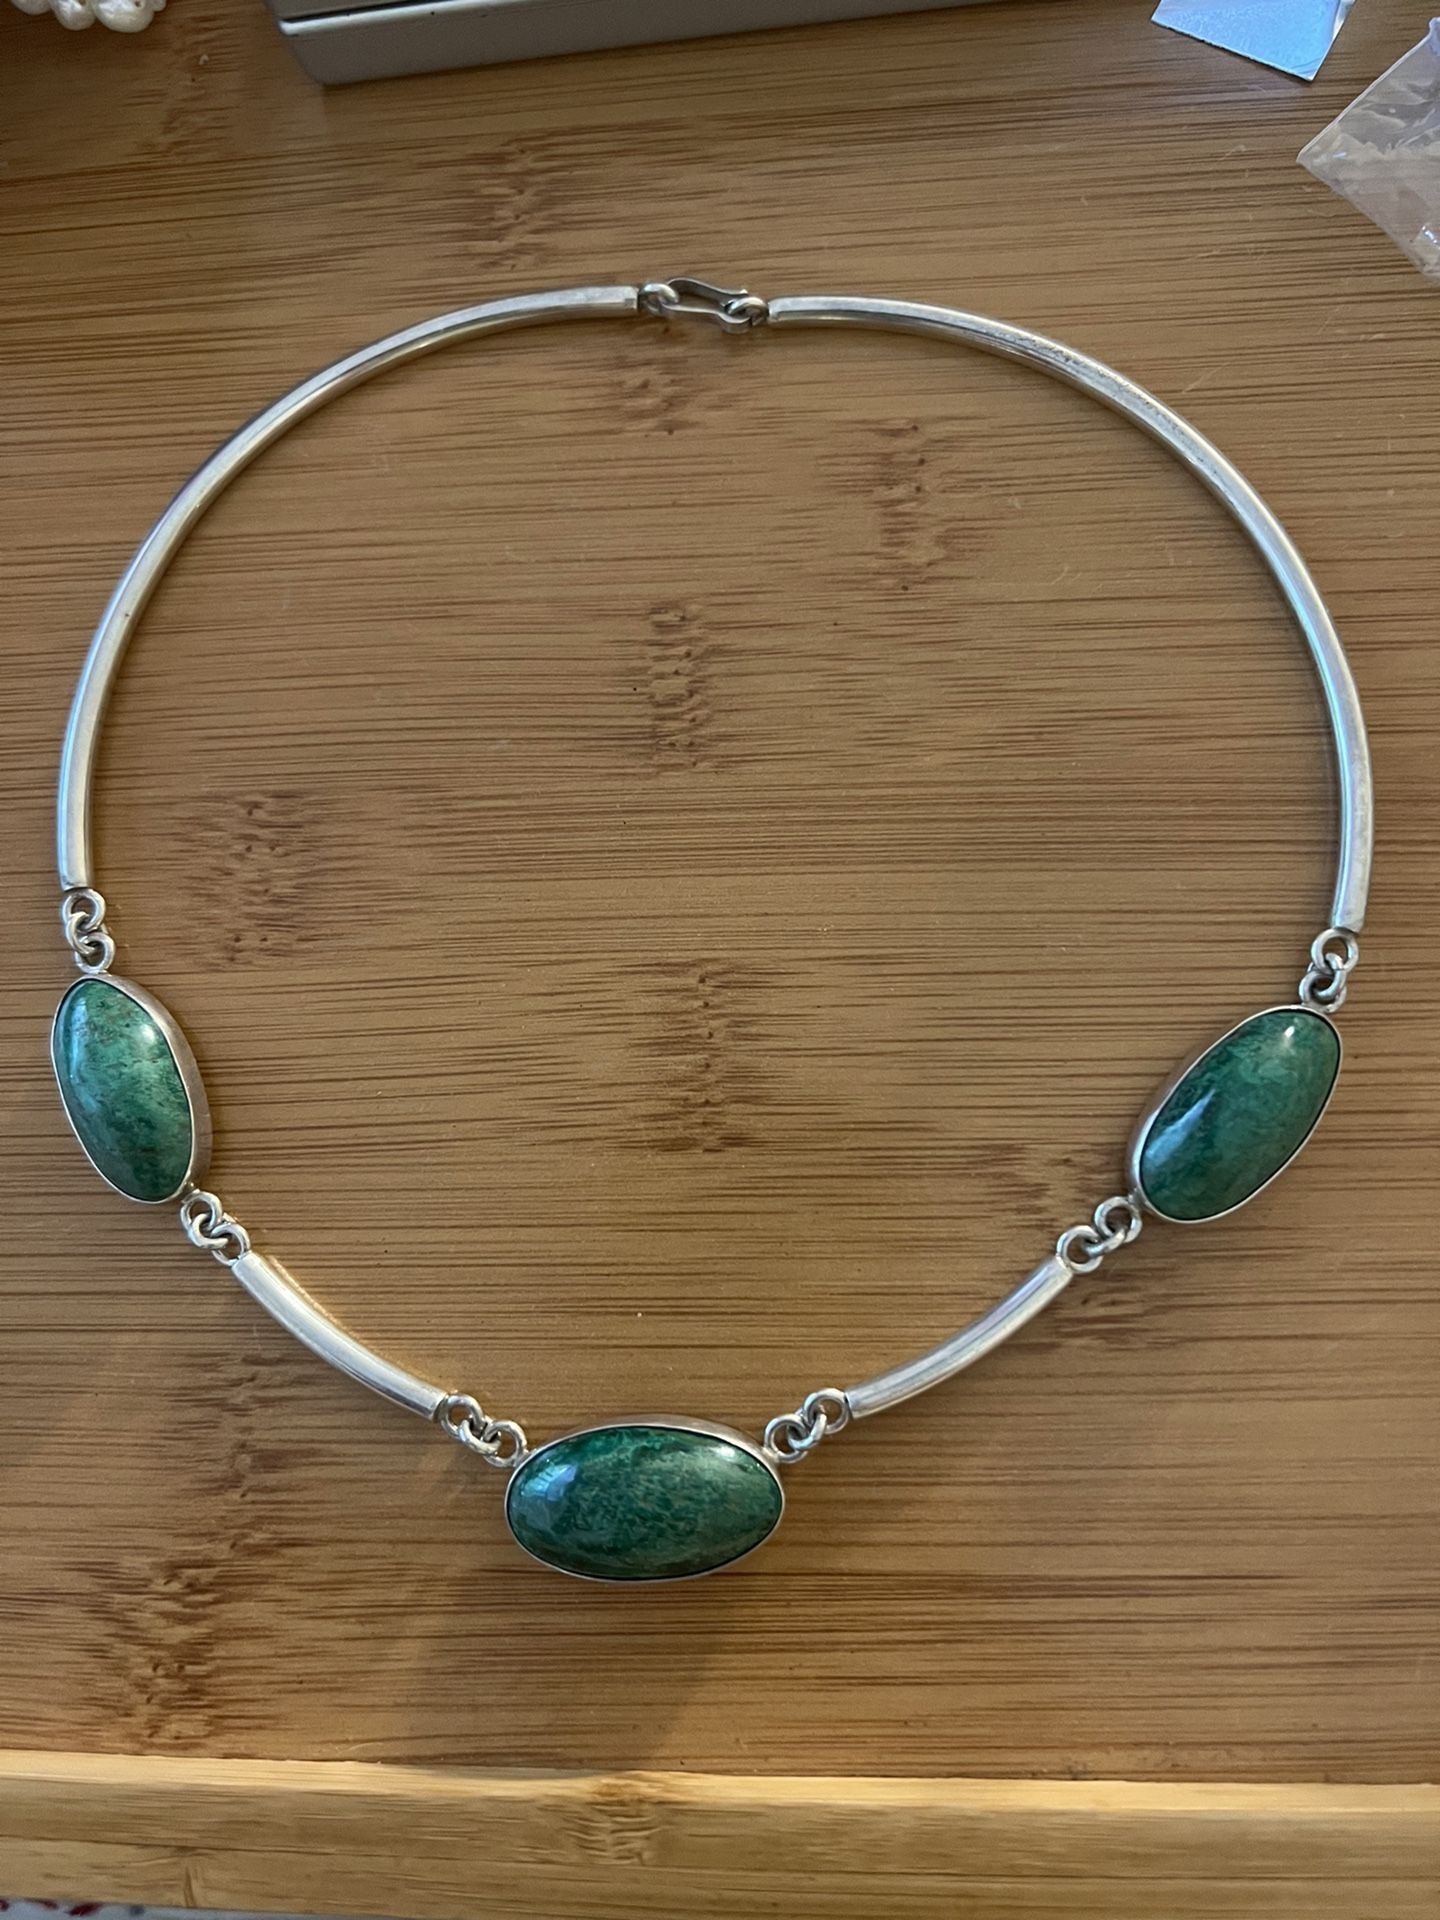 VINTAGE JOAQUÍN TINTA ECUADOR silver necklace, it is a necklace that weighs 35.5 grams, I do not know the name of the stones, I accept offers, I have 